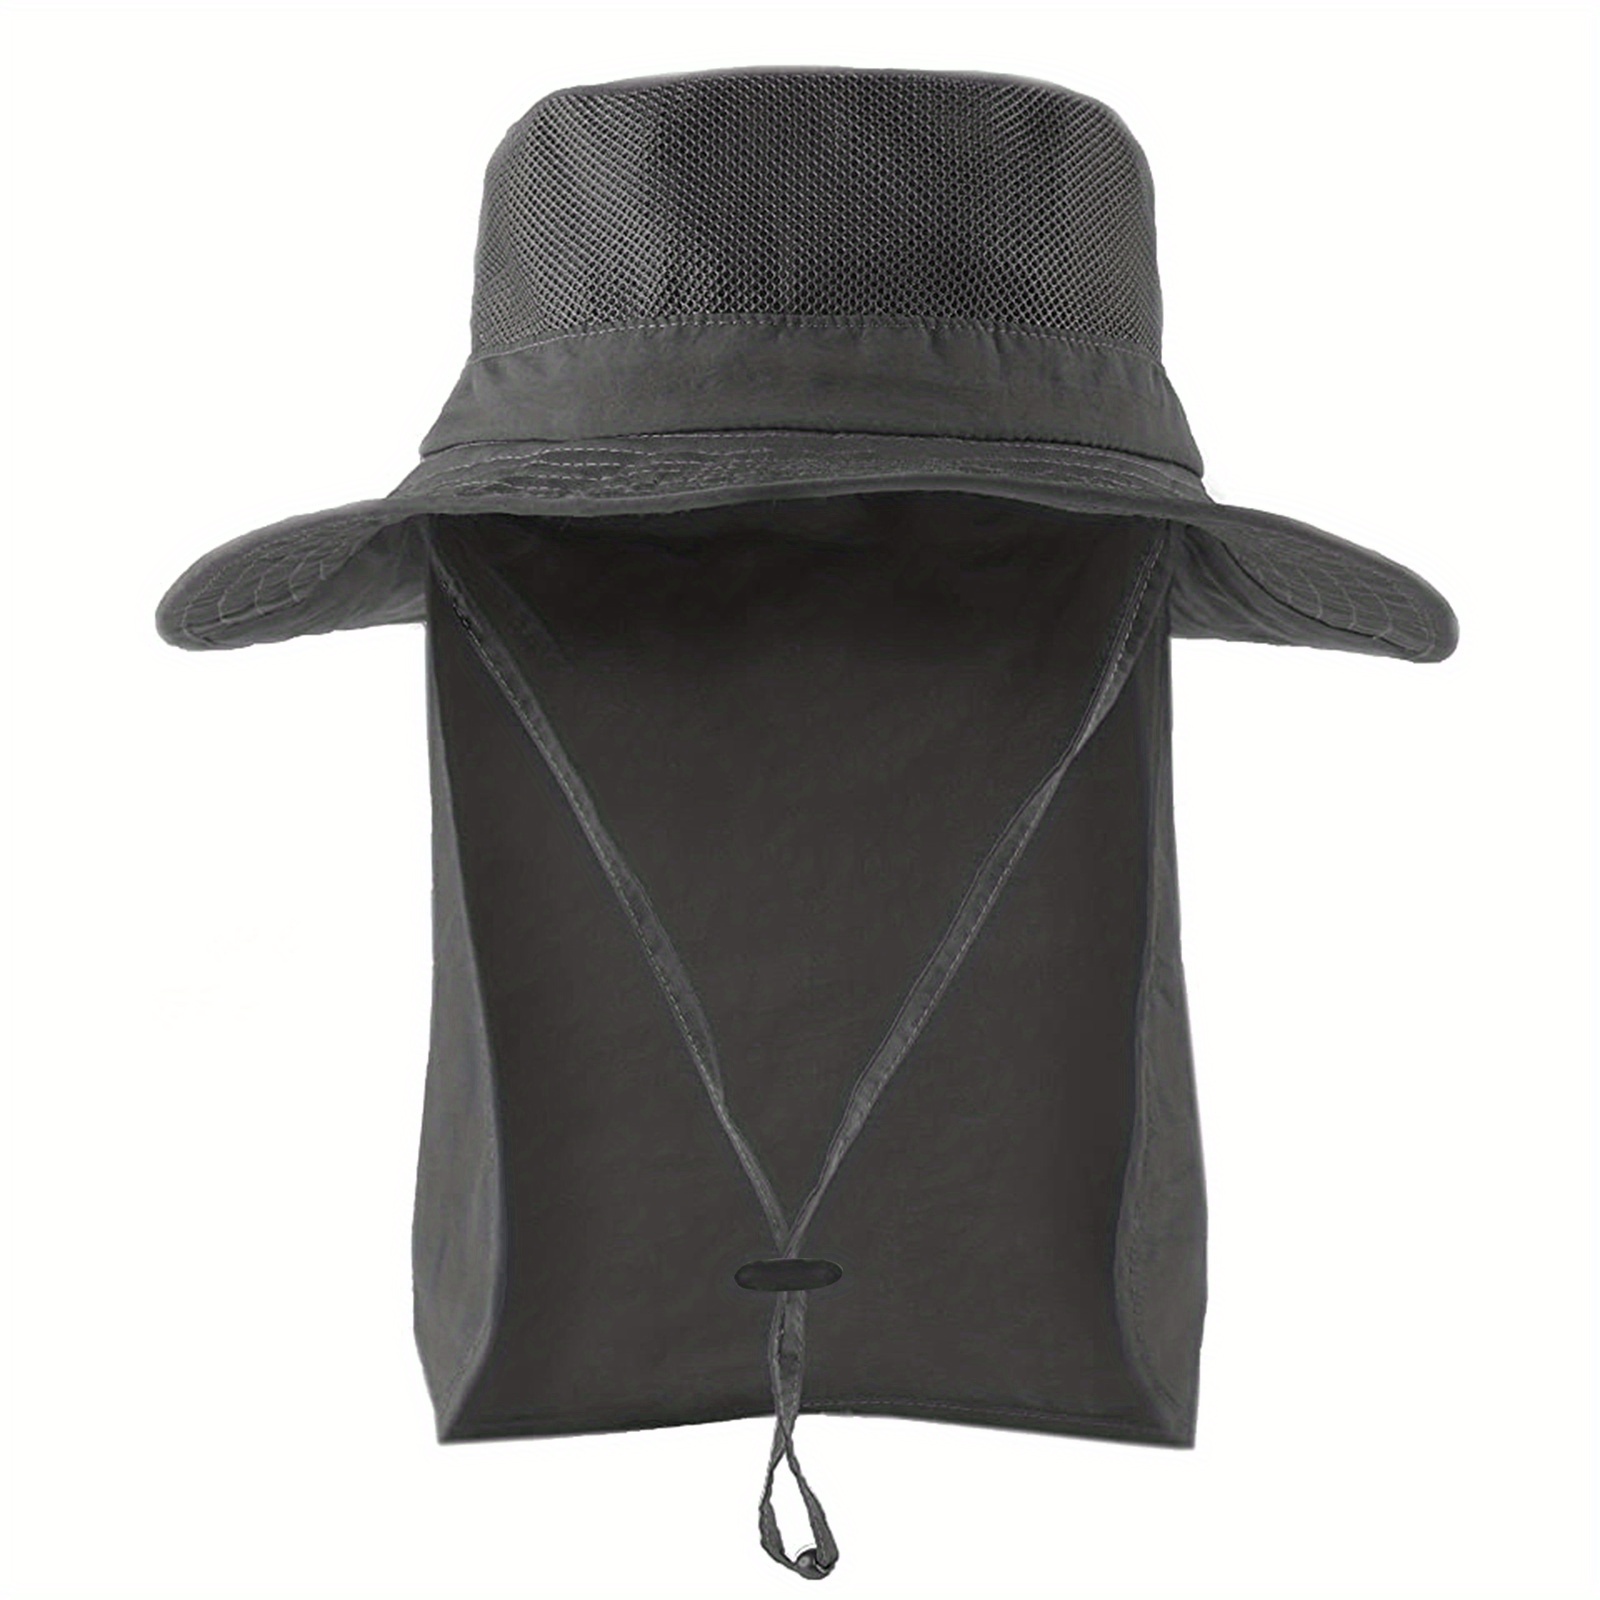 Grey Funky Sun Protection Hat, Men's Hat For Men Wide Brim Hiking Neck Flap Fishing Hat With